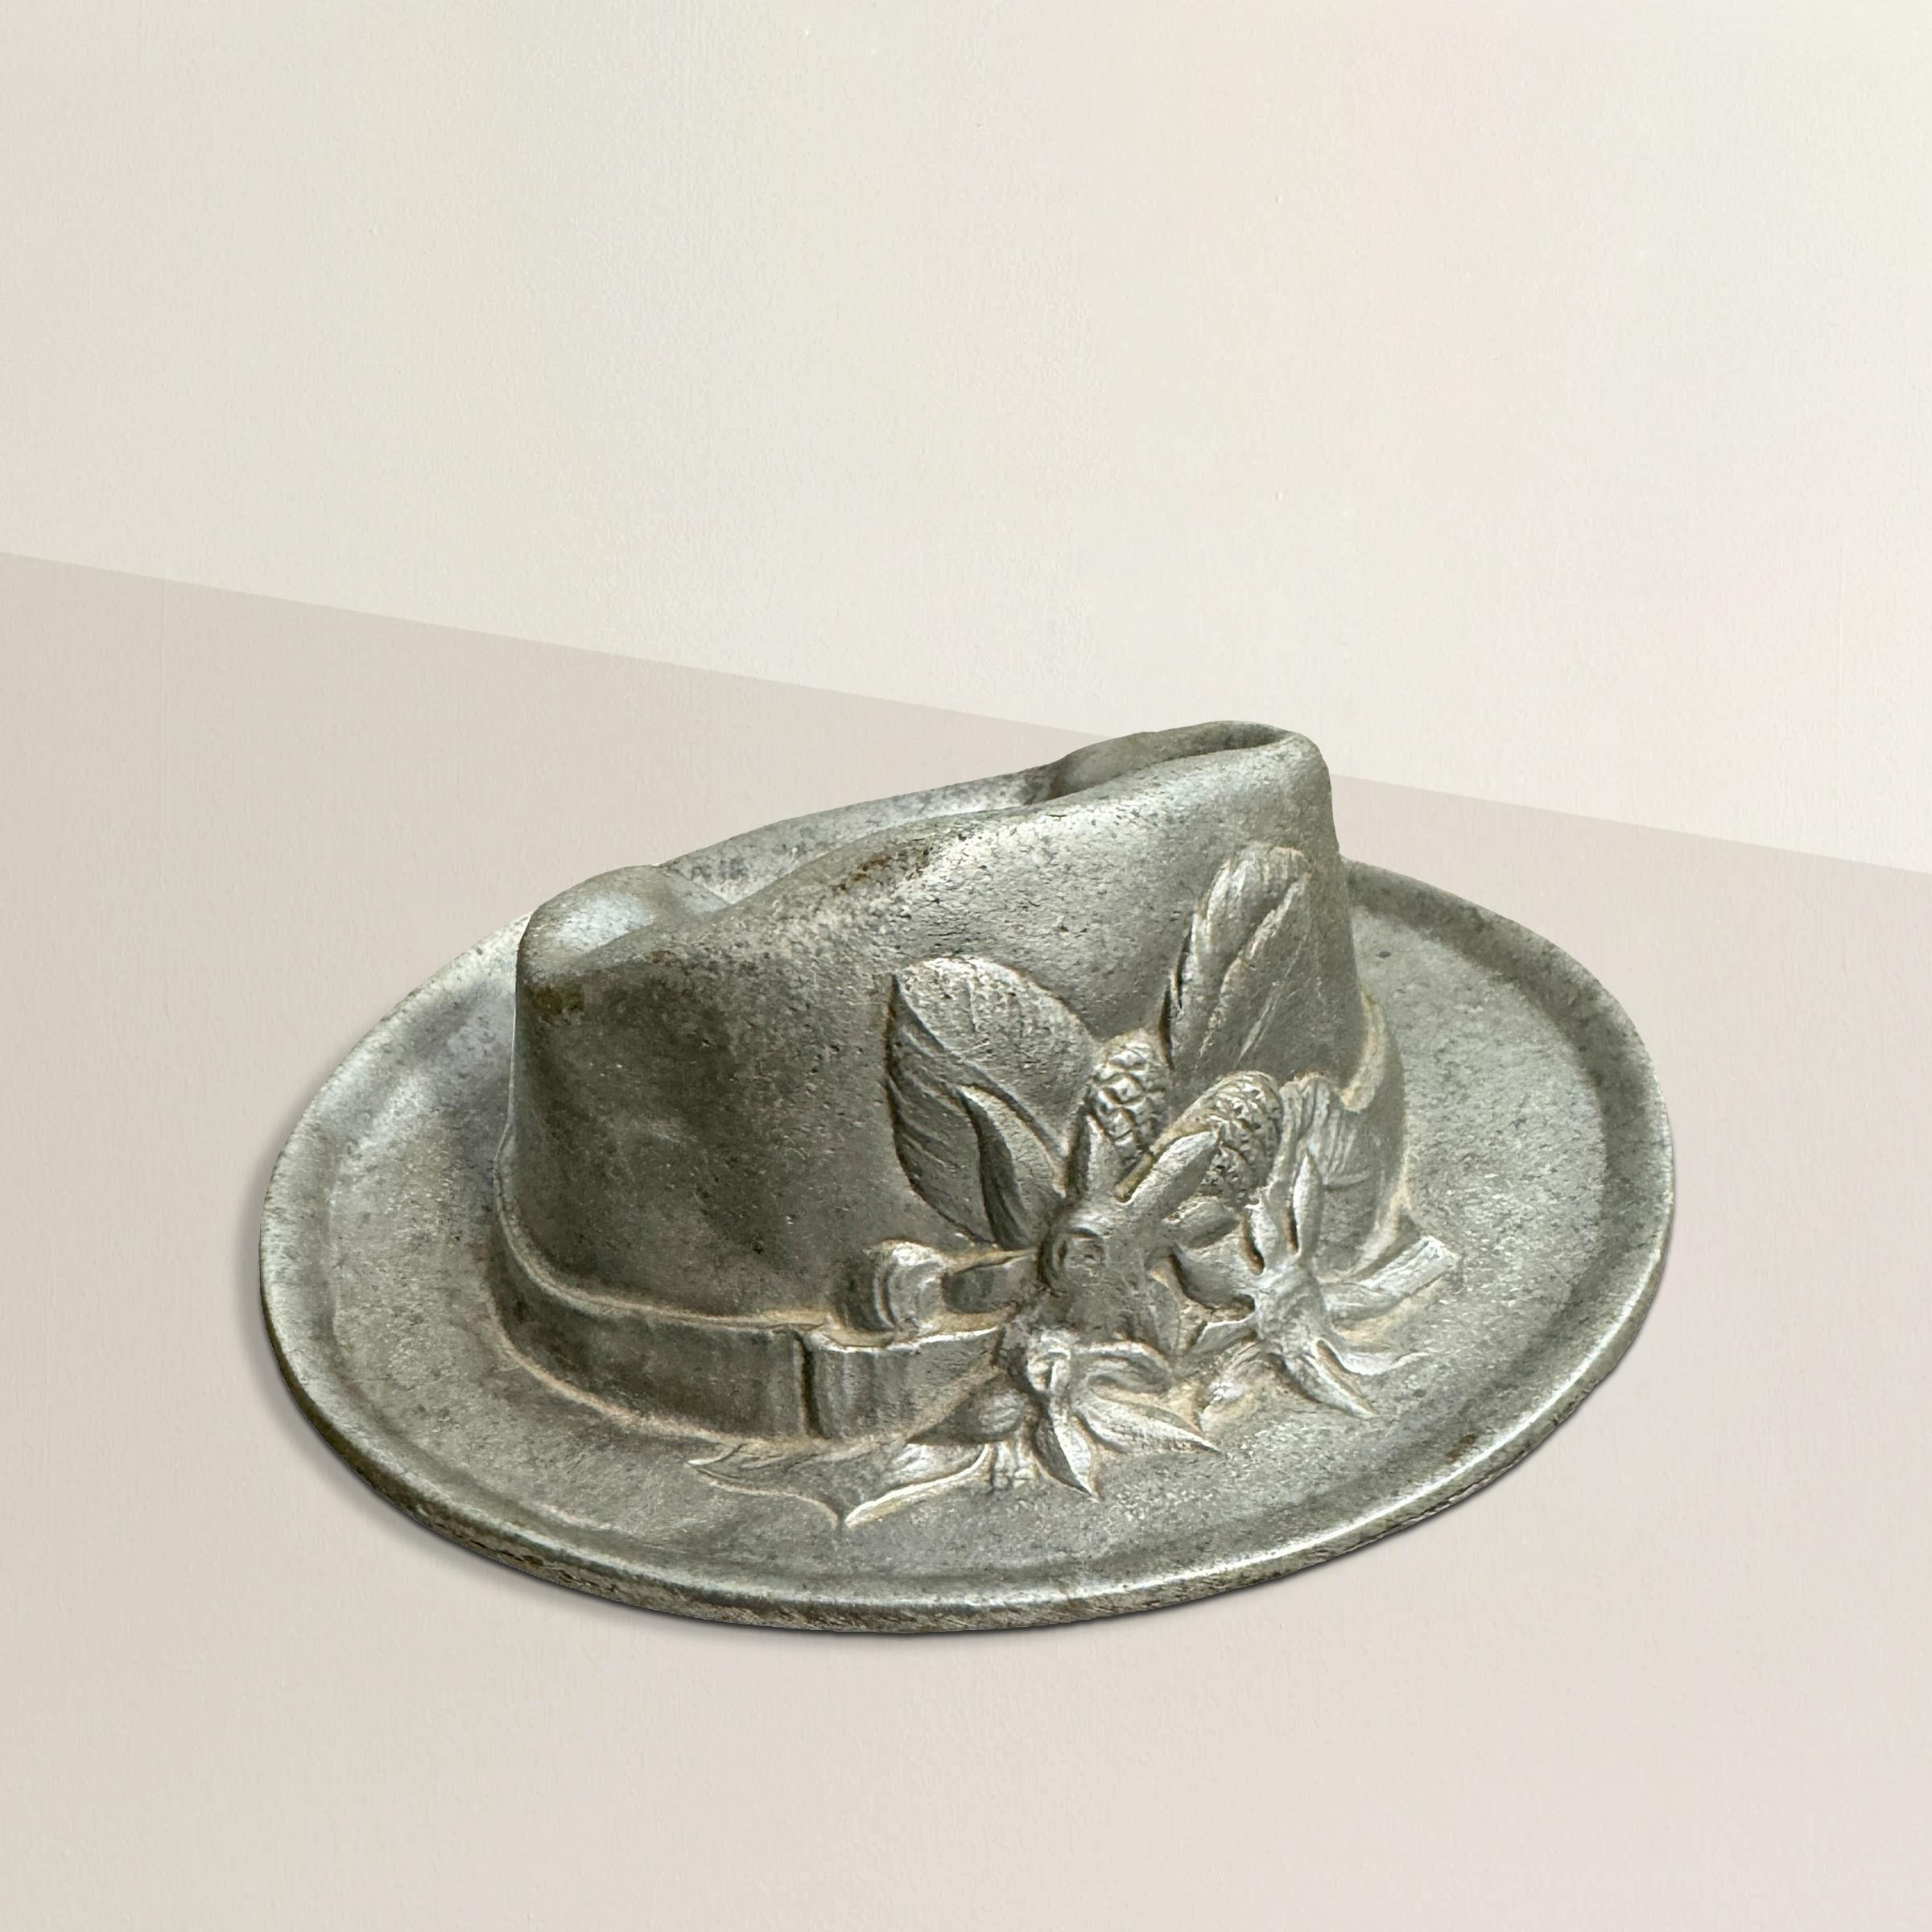 This mid-20th-century pewter dish is a charming and functional piece shaped like a Tyrolean hat, complete with a dimpled crown. Perfect for your holding keys, pocket change, or any small items, it makes an ideal catchall for your nightstand, entry